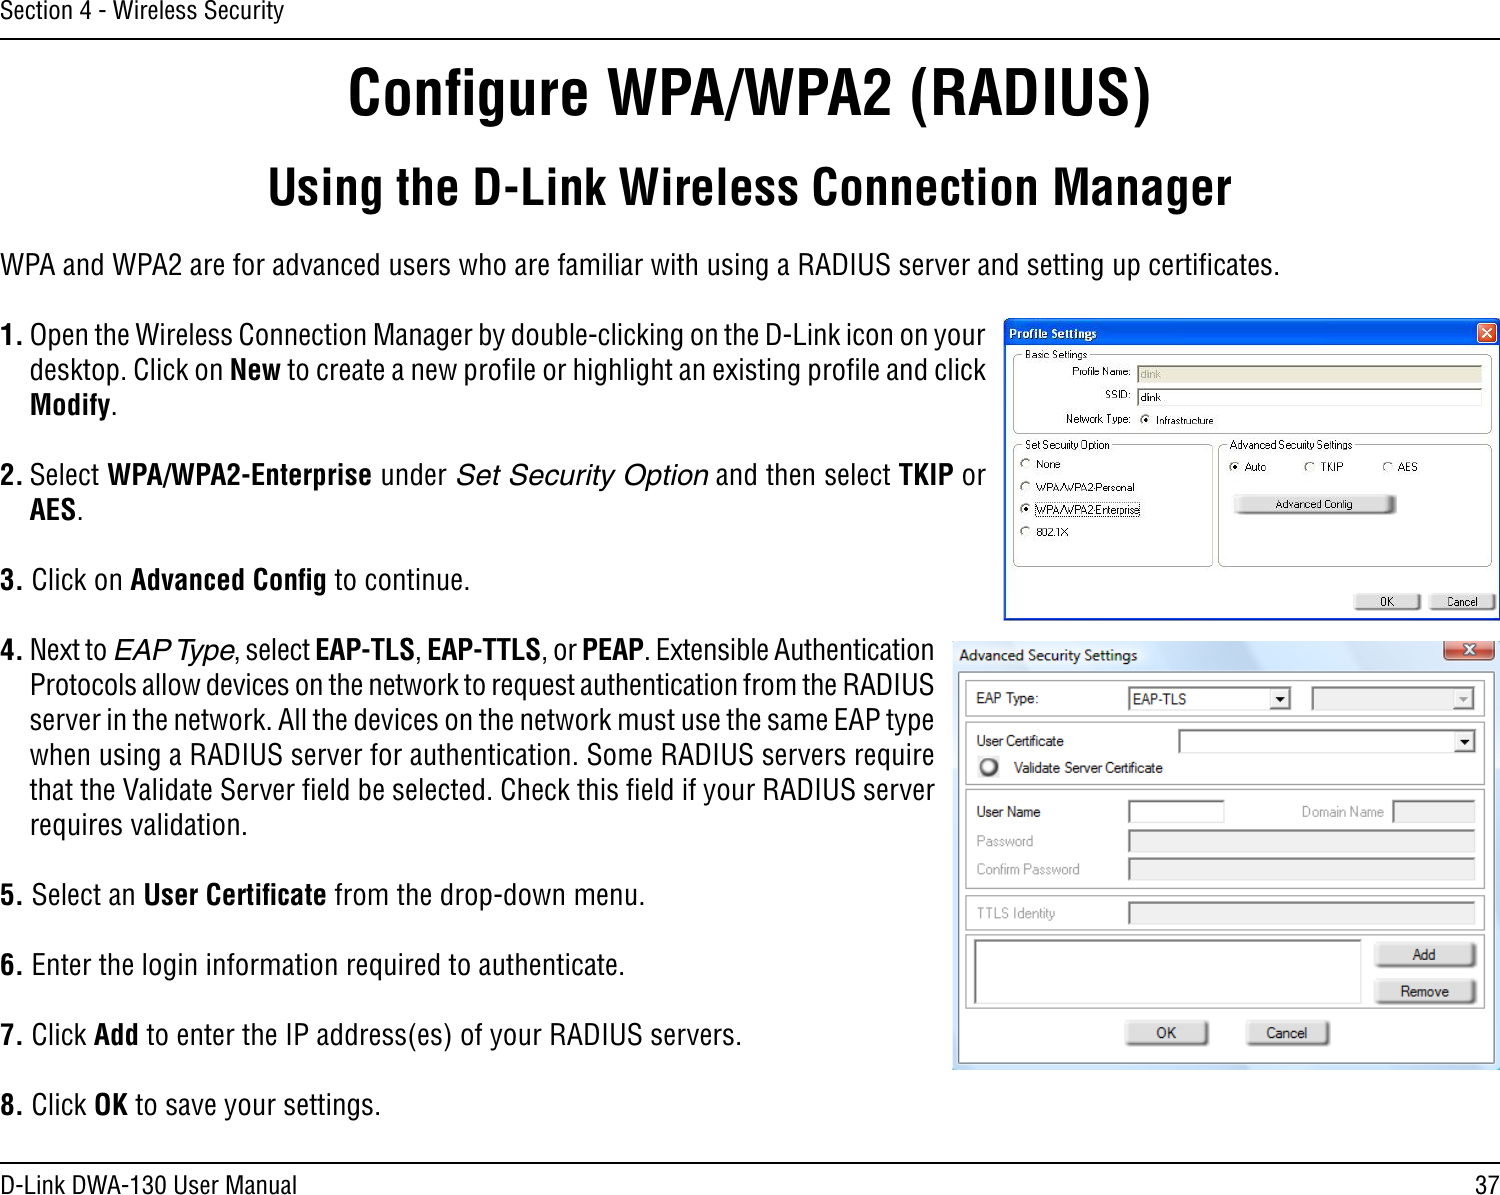 37D-Link DWA-130 User ManualSection 4 - Wireless SecurityConﬁgure WPA/WPA2 (RADIUS)Using the D-Link Wireless Connection ManagerWPA and WPA2 are for advanced users who are familiar with using a RADIUS server and setting up certiﬁcates.1. Open the Wireless Connection Manager by double-clicking on the D-Link icon on your desktop. Click on New to create a new proﬁle or highlight an existing proﬁle and click Modify. 2. Select WPA/WPA2-Enterprise under Set Security Option and then select TKIP or AES.3. Click on Advanced Conﬁg to continue.4. Next to EAP Type, select EAP-TLS, EAP-TTLS, or PEAP. Extensible Authentication Protocols allow devices on the network to request authentication from the RADIUS server in the network. All the devices on the network must use the same EAP type when using a RADIUS server for authentication. Some RADIUS servers require that the Validate Server ﬁeld be selected. Check this ﬁeld if your RADIUS server requires validation.5. Select an User Certiﬁcate from the drop-down menu.6. Enter the login information required to authenticate.7. Click Add to enter the IP address(es) of your RADIUS servers.8. Click OK to save your settings.